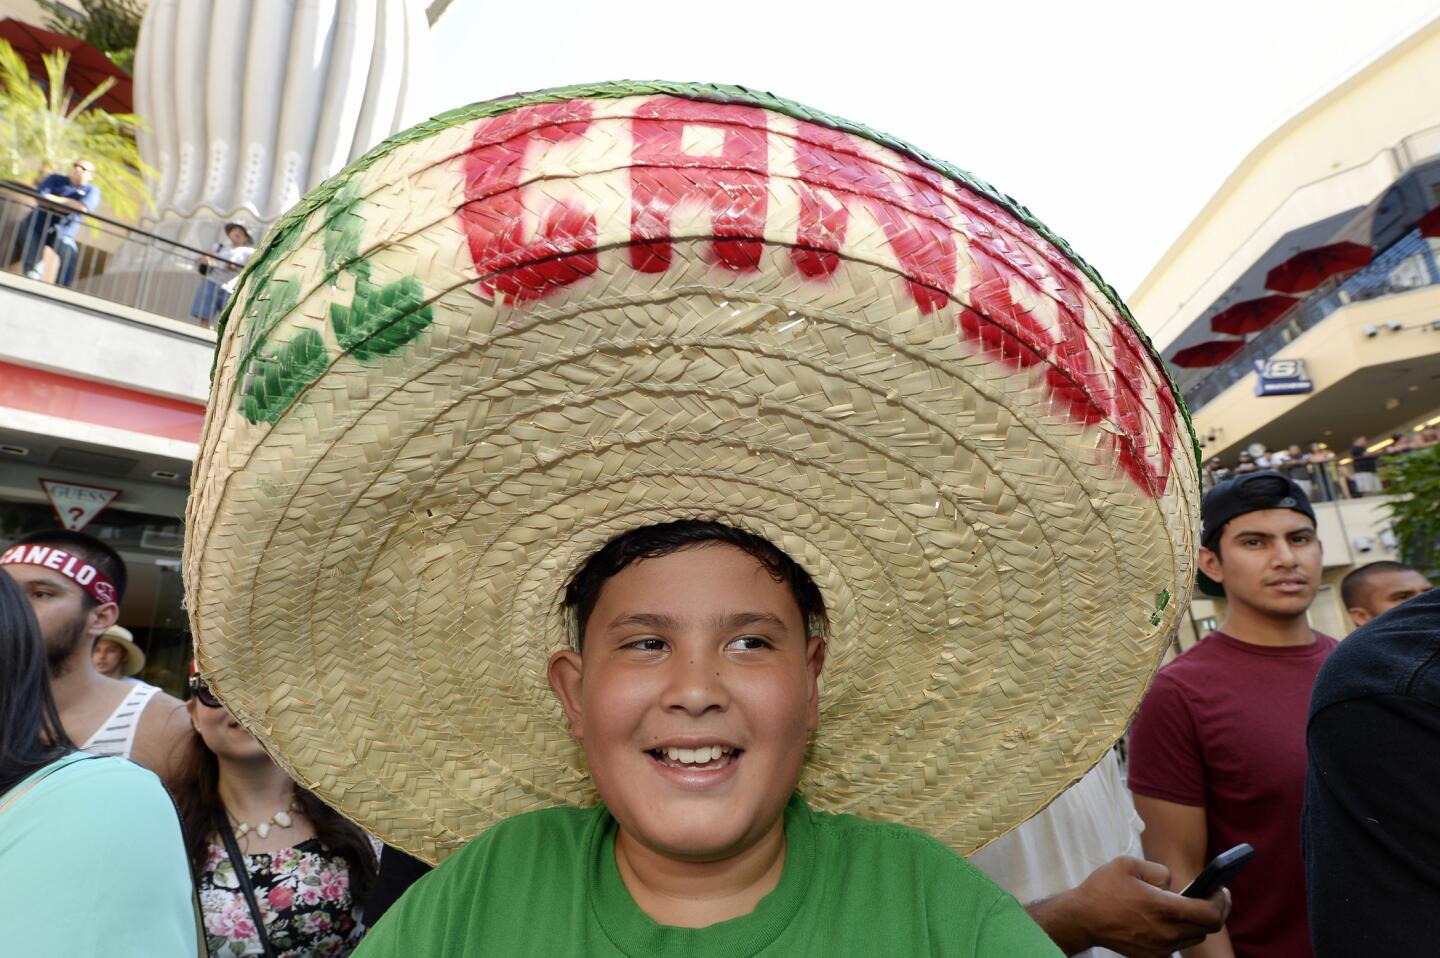 LOS ANGELES, CA - AUGUST 24: A fan of boxer Canelo Alvarez, former WBC and WBA Super Welterweight World Champion, wears a large sombrero hat during a news conference for the announcement of the WBC middleweight title bout between current WBC champion Miguel Cotto and Canelo Alvarez August 24, 2015, in Los Angeles, California. The WBC middleweight title bout will take place November 21 at the Mandalay Bay Events Center in Las Vegas, Nevada. (Photo by Kevork Djansezian/Getty Images) ** OUTS - ELSENT, FPG - OUTS * NM, PH, VA if sourced by CT, LA or MoD **